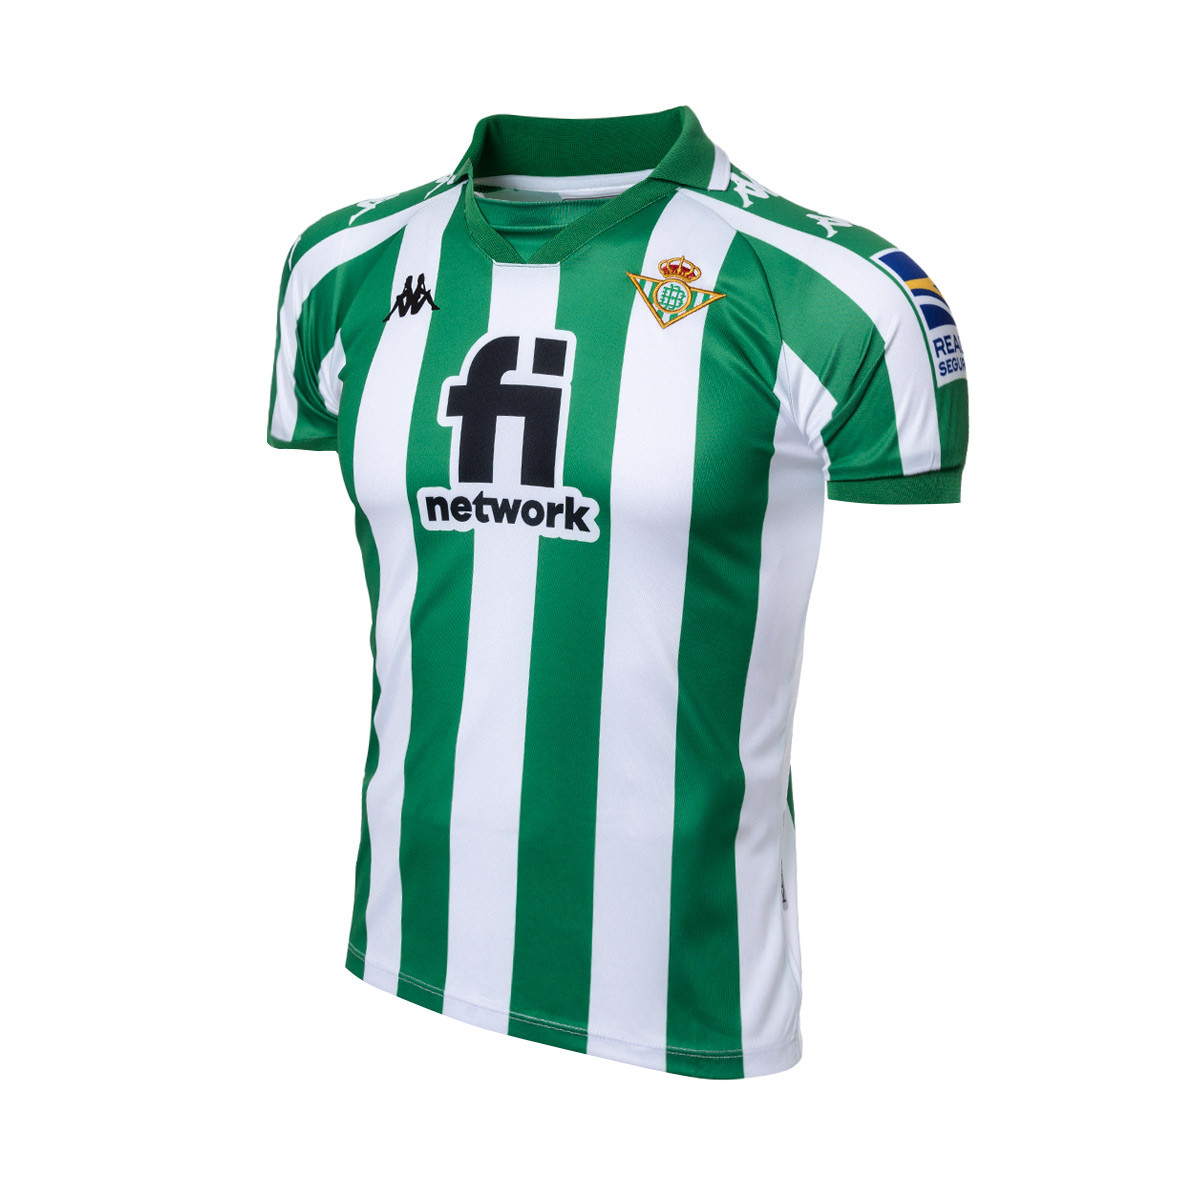 Approximation Superiority Great Barrier Reef Jersey Kappa Real Betis Balompié Matchwear Retro White - Fútbol Emotion